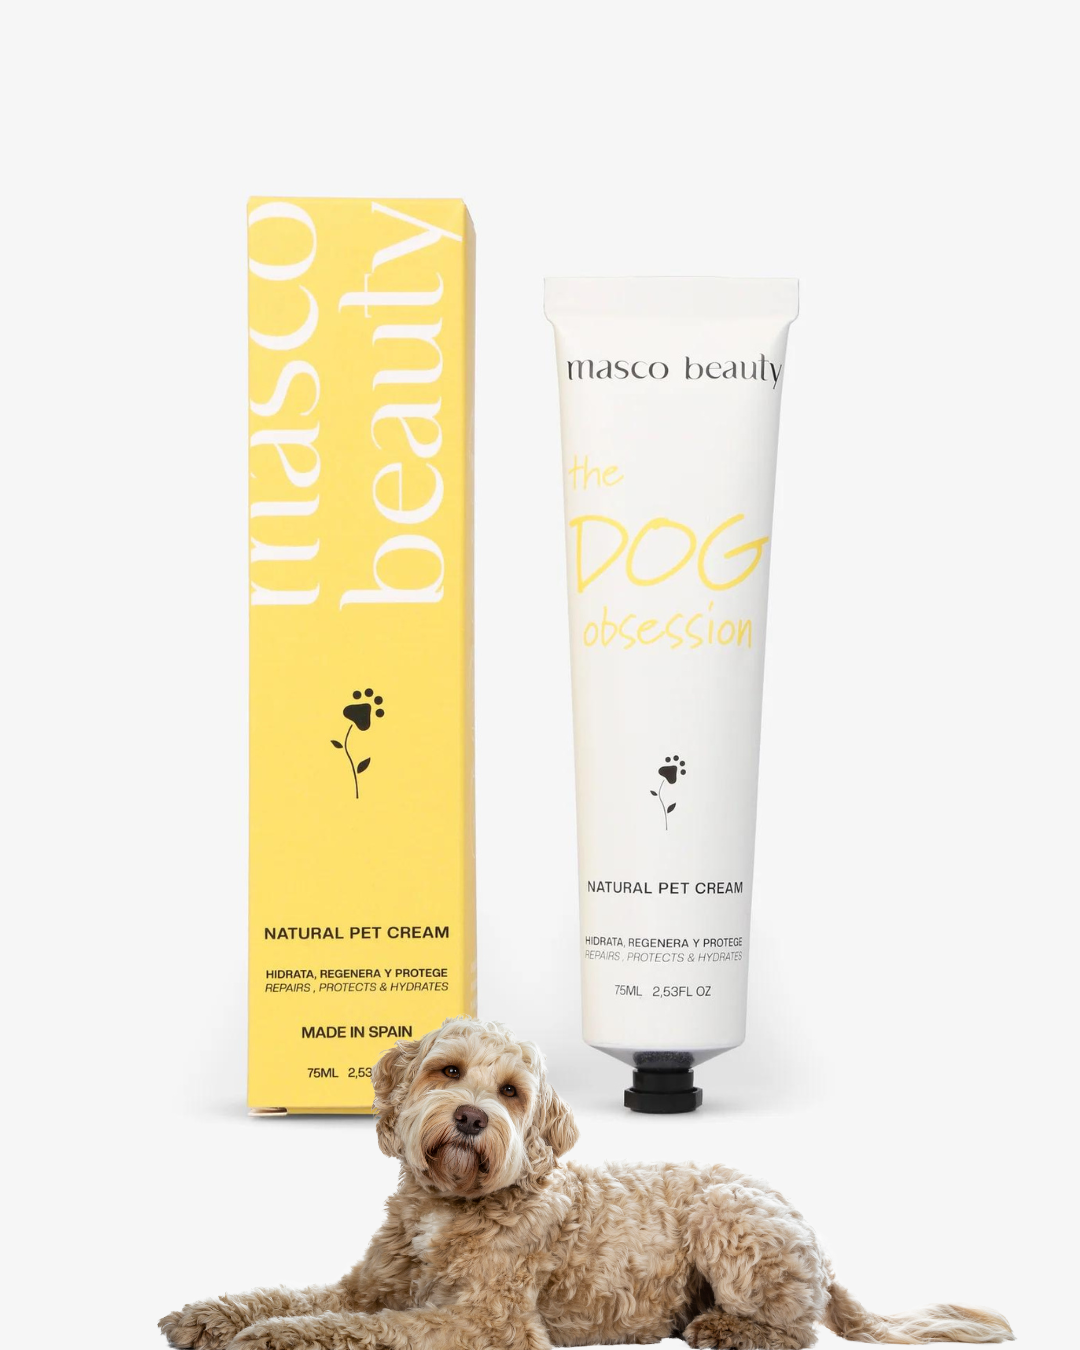 Natural Pet Cream " Dog Obsession"